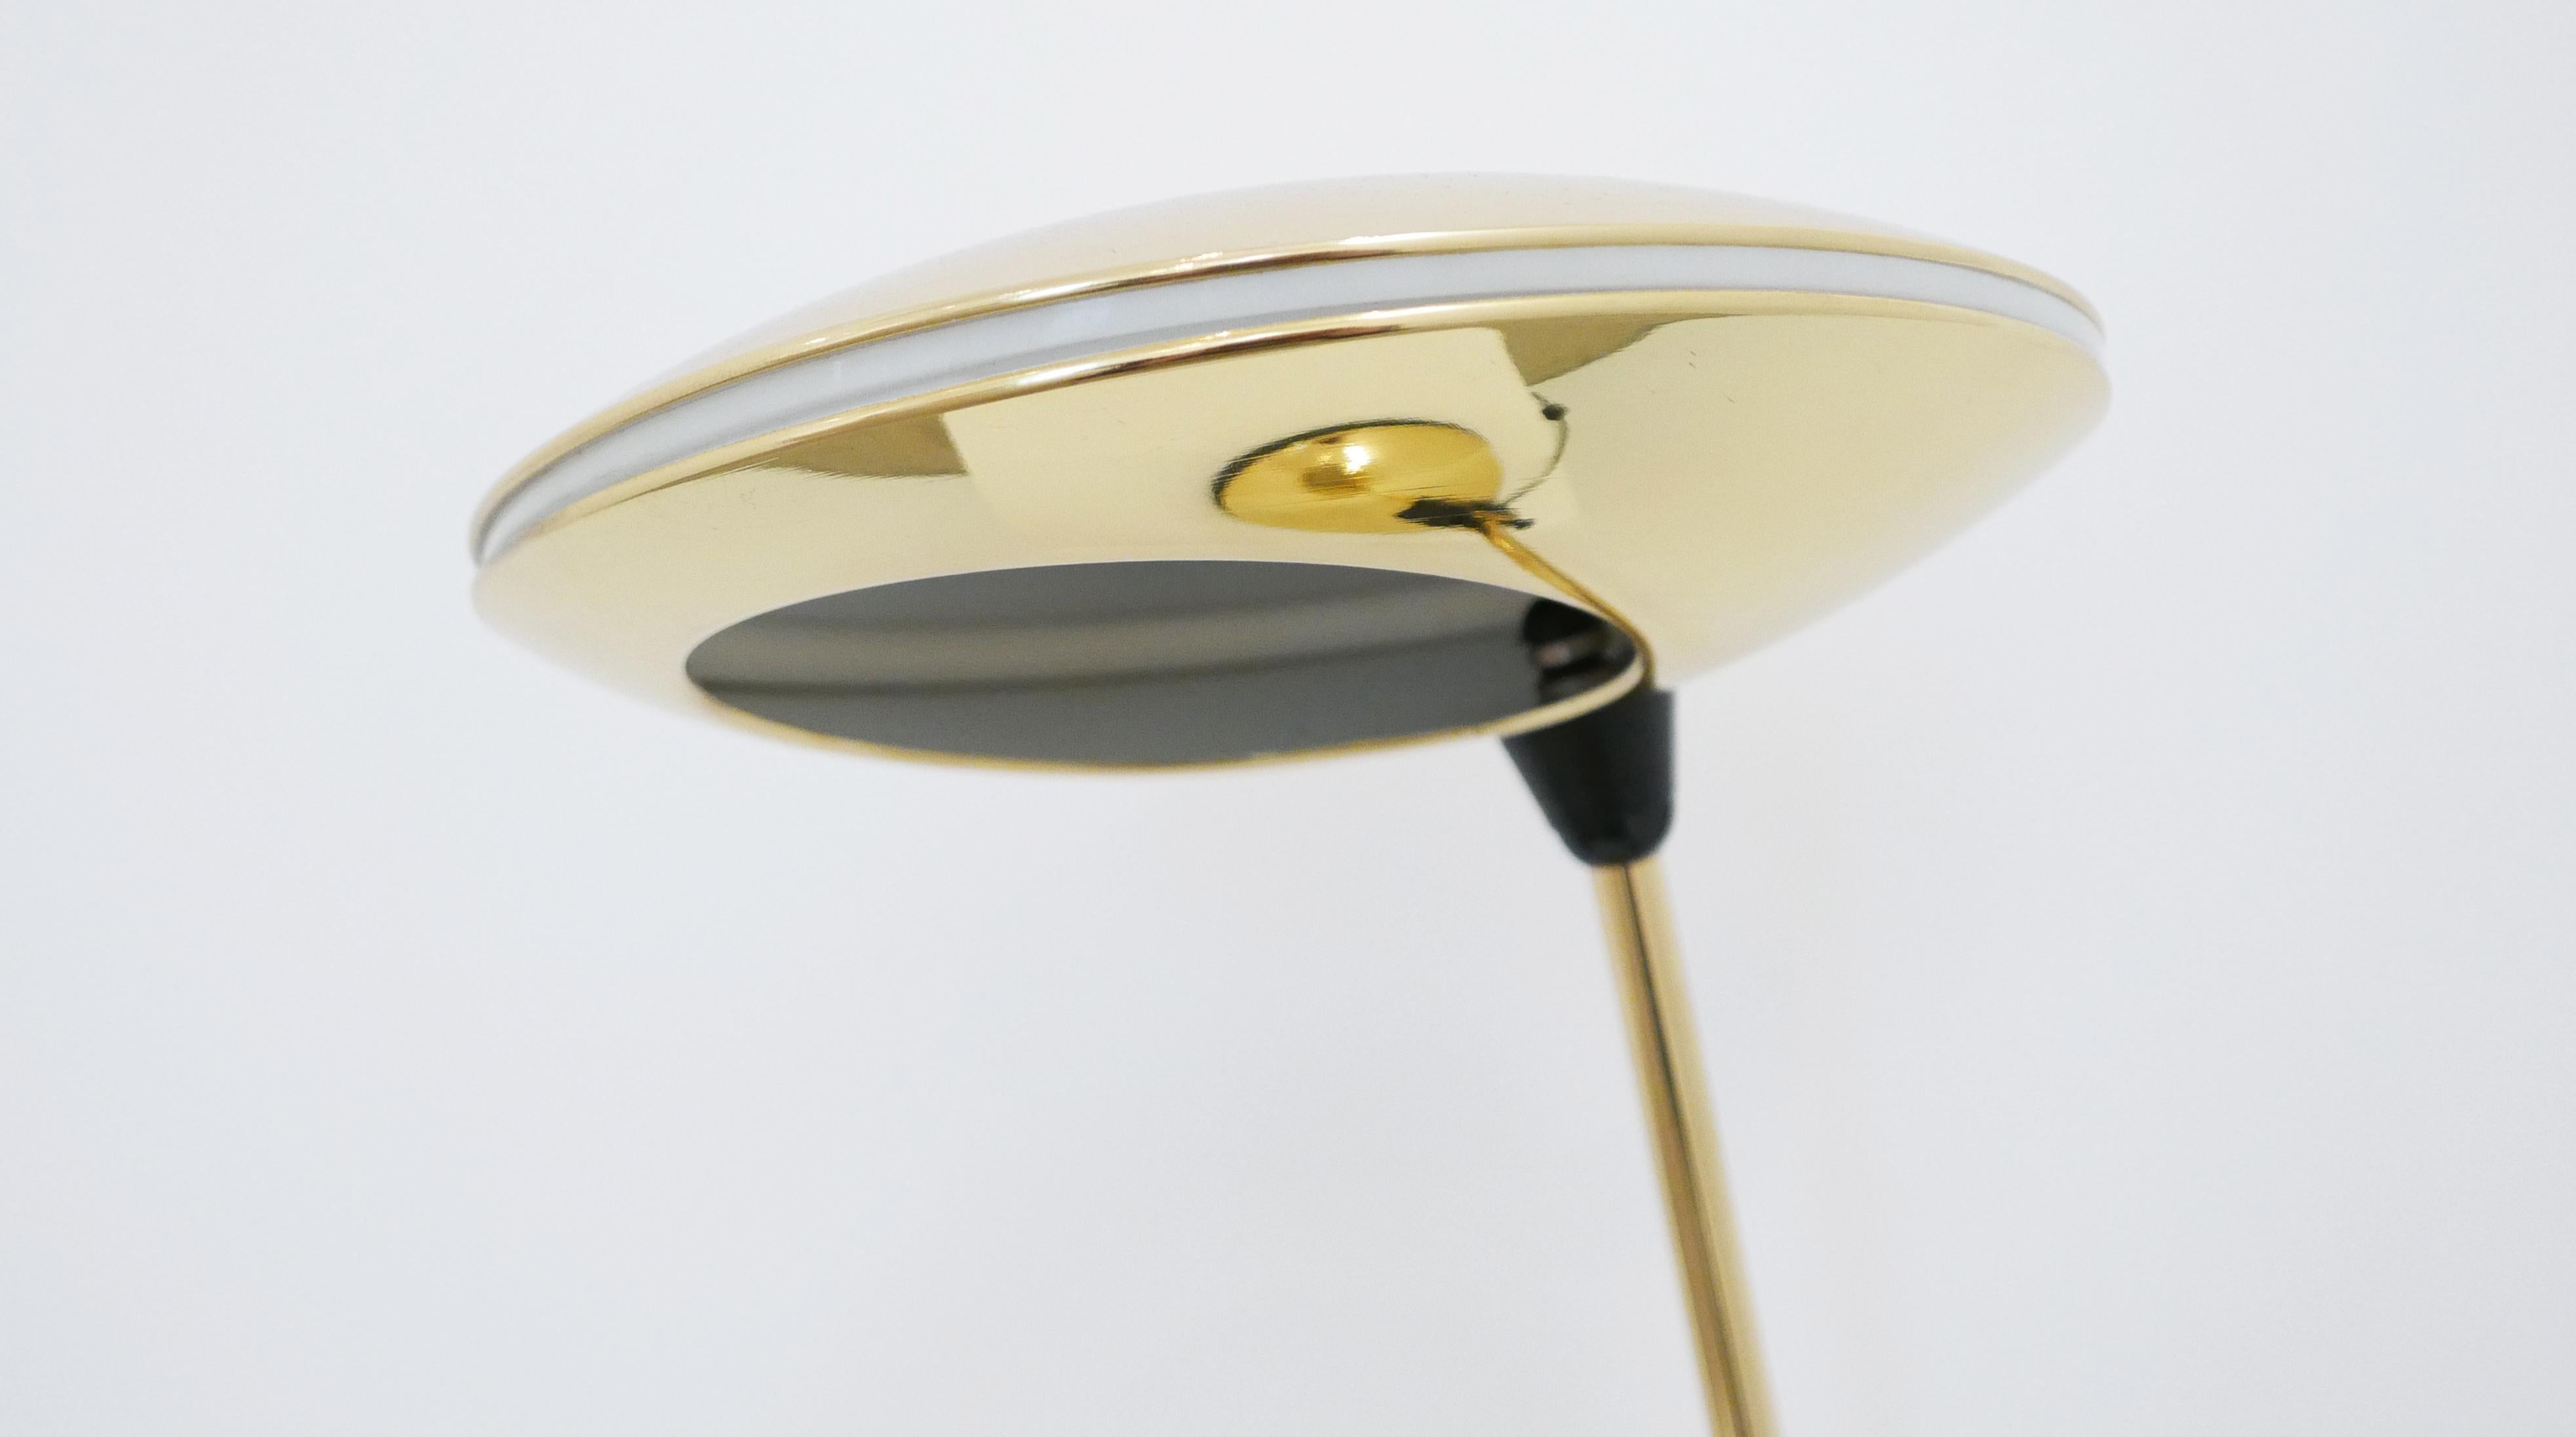 Brass-plated steel, plastic and frosted glass
Measures: 21.5 H x 20 W x 12.5 D inches
Meticulously restored and in excellent condition

Domed base holds a cylindrical shaft with adjustable inclination. Disc lamp shade features beautiful cut-out